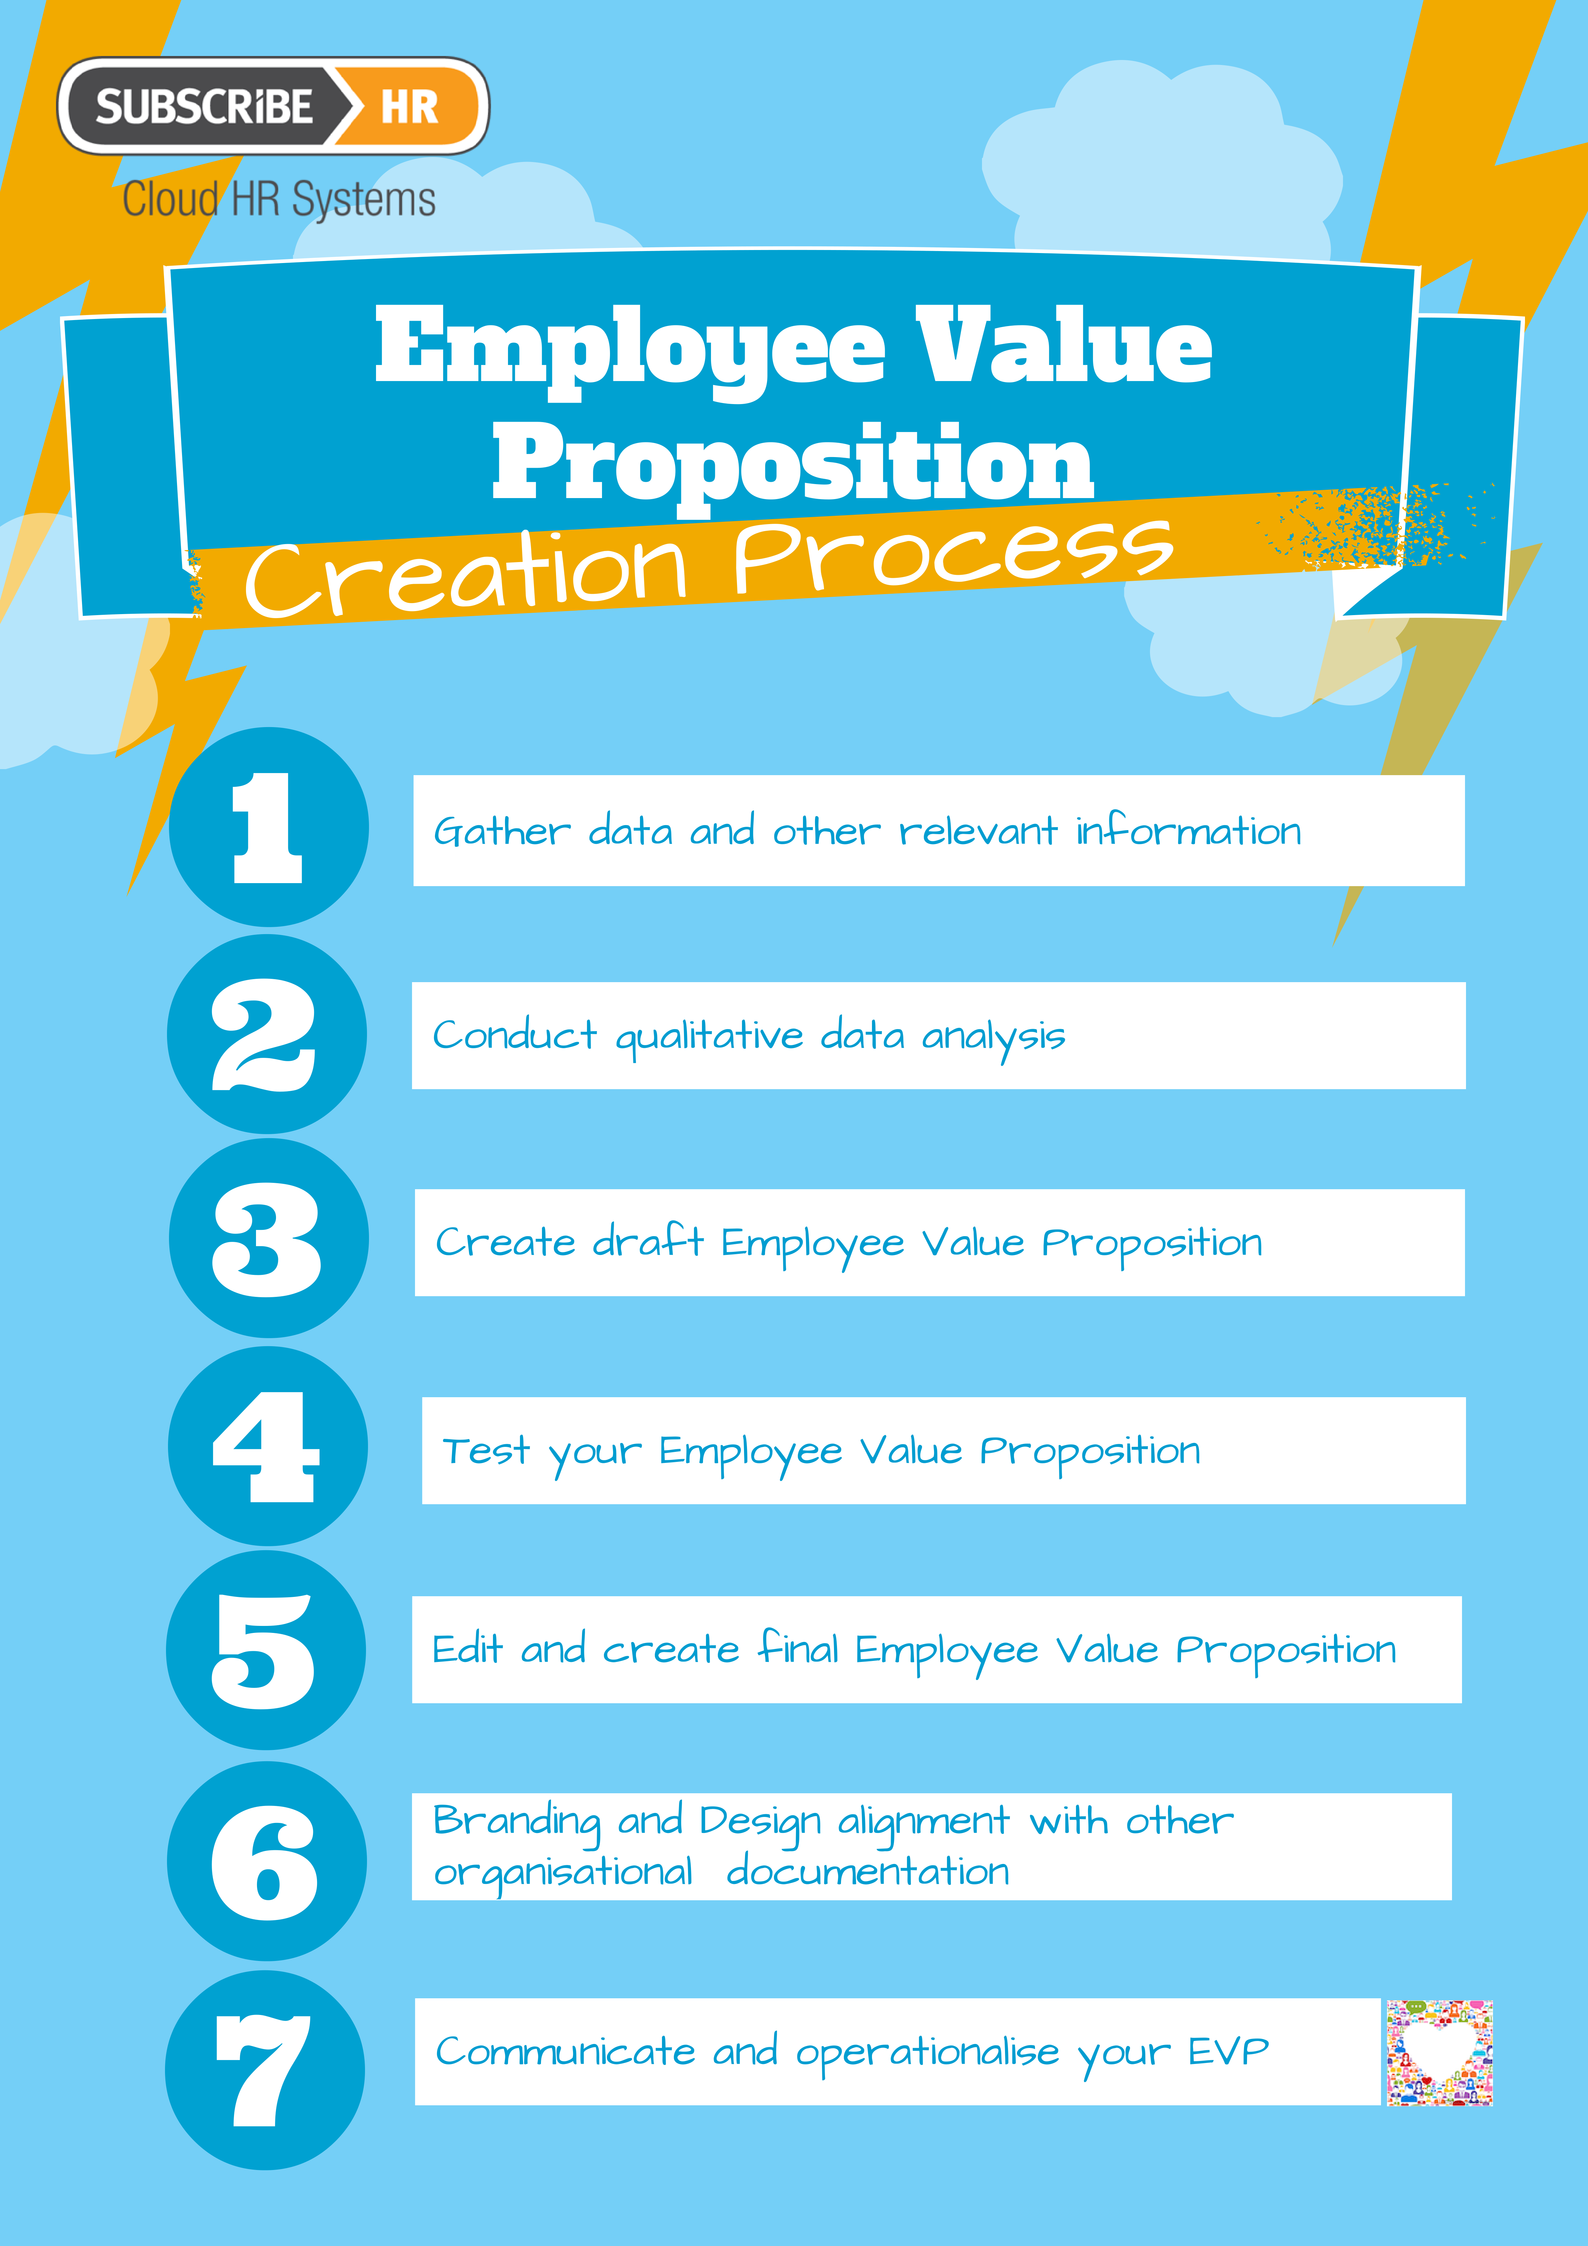 Subscribe-HR_Employee_Value_Proposition_Creation_Process_2014